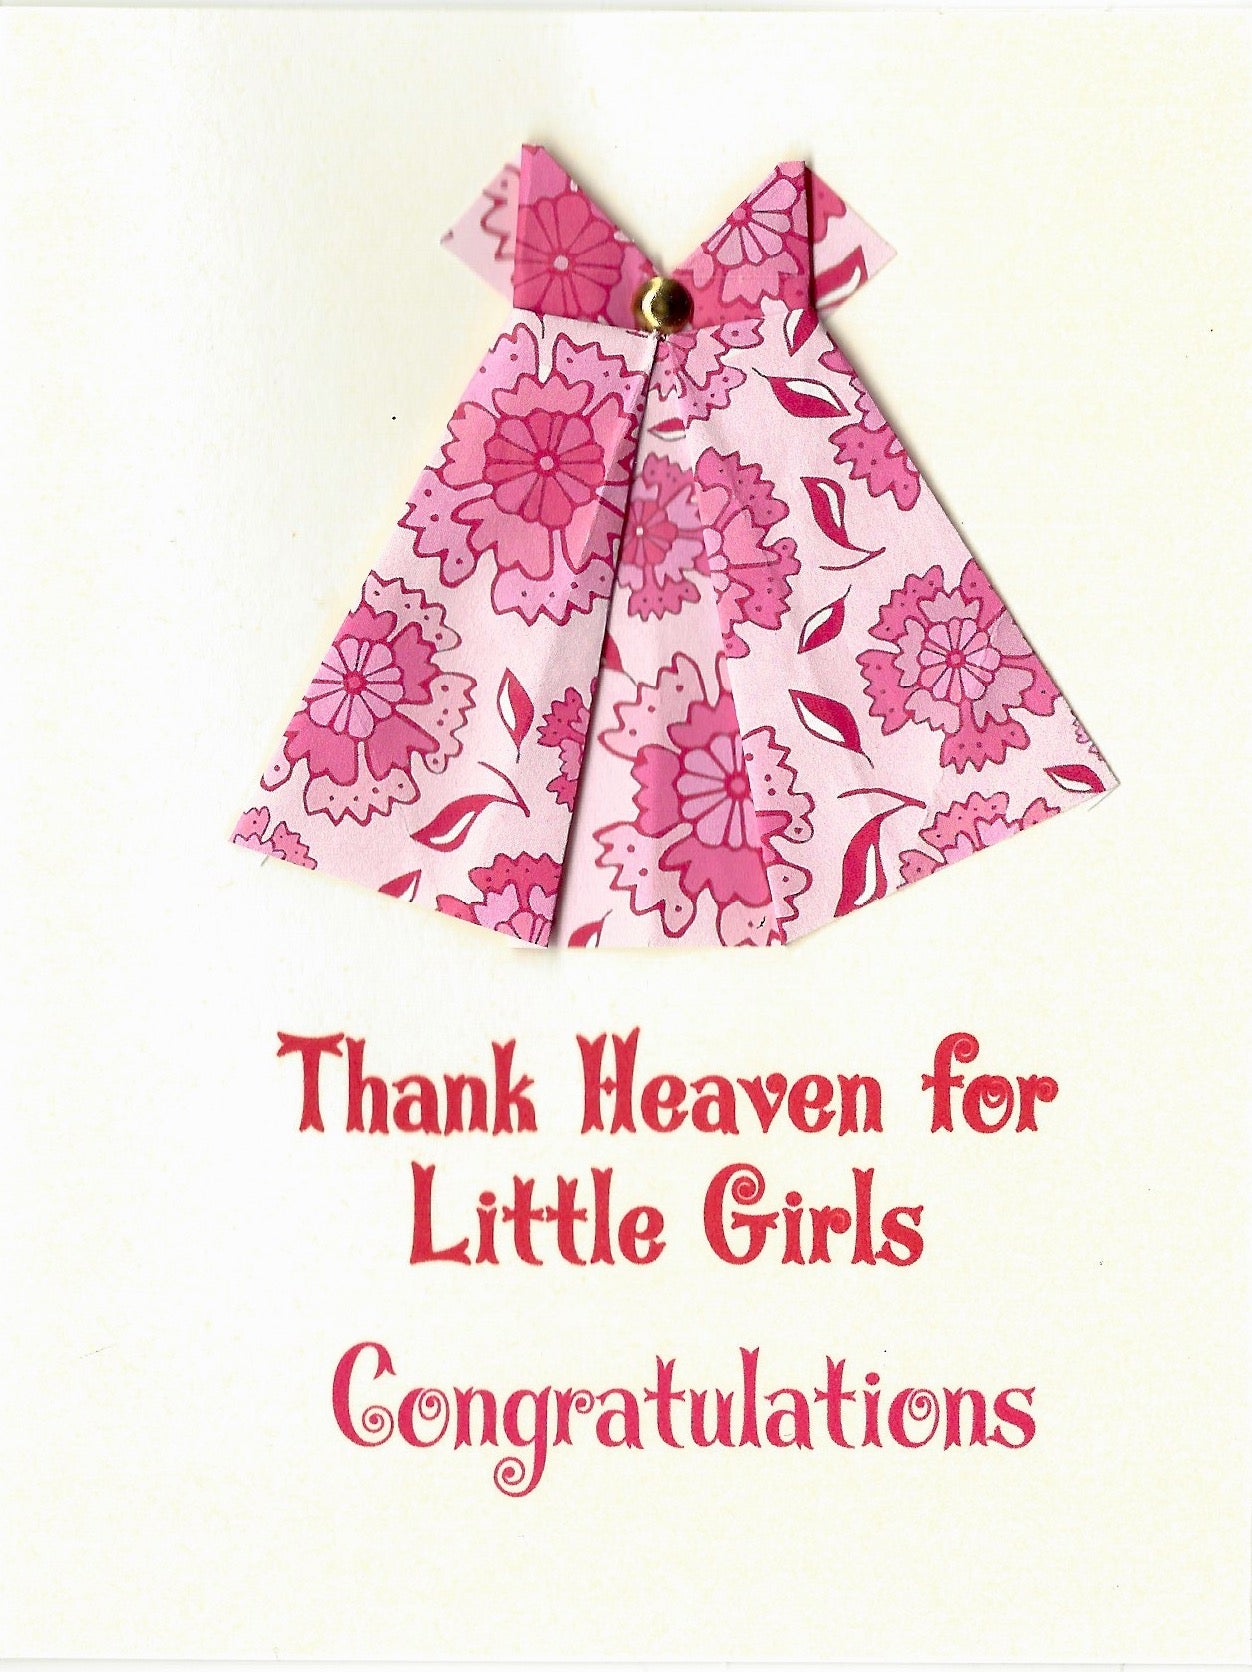 Congratulations card for a new mom, daughter, girl friend, with pink floral origami dress Virginia Fitzgerald